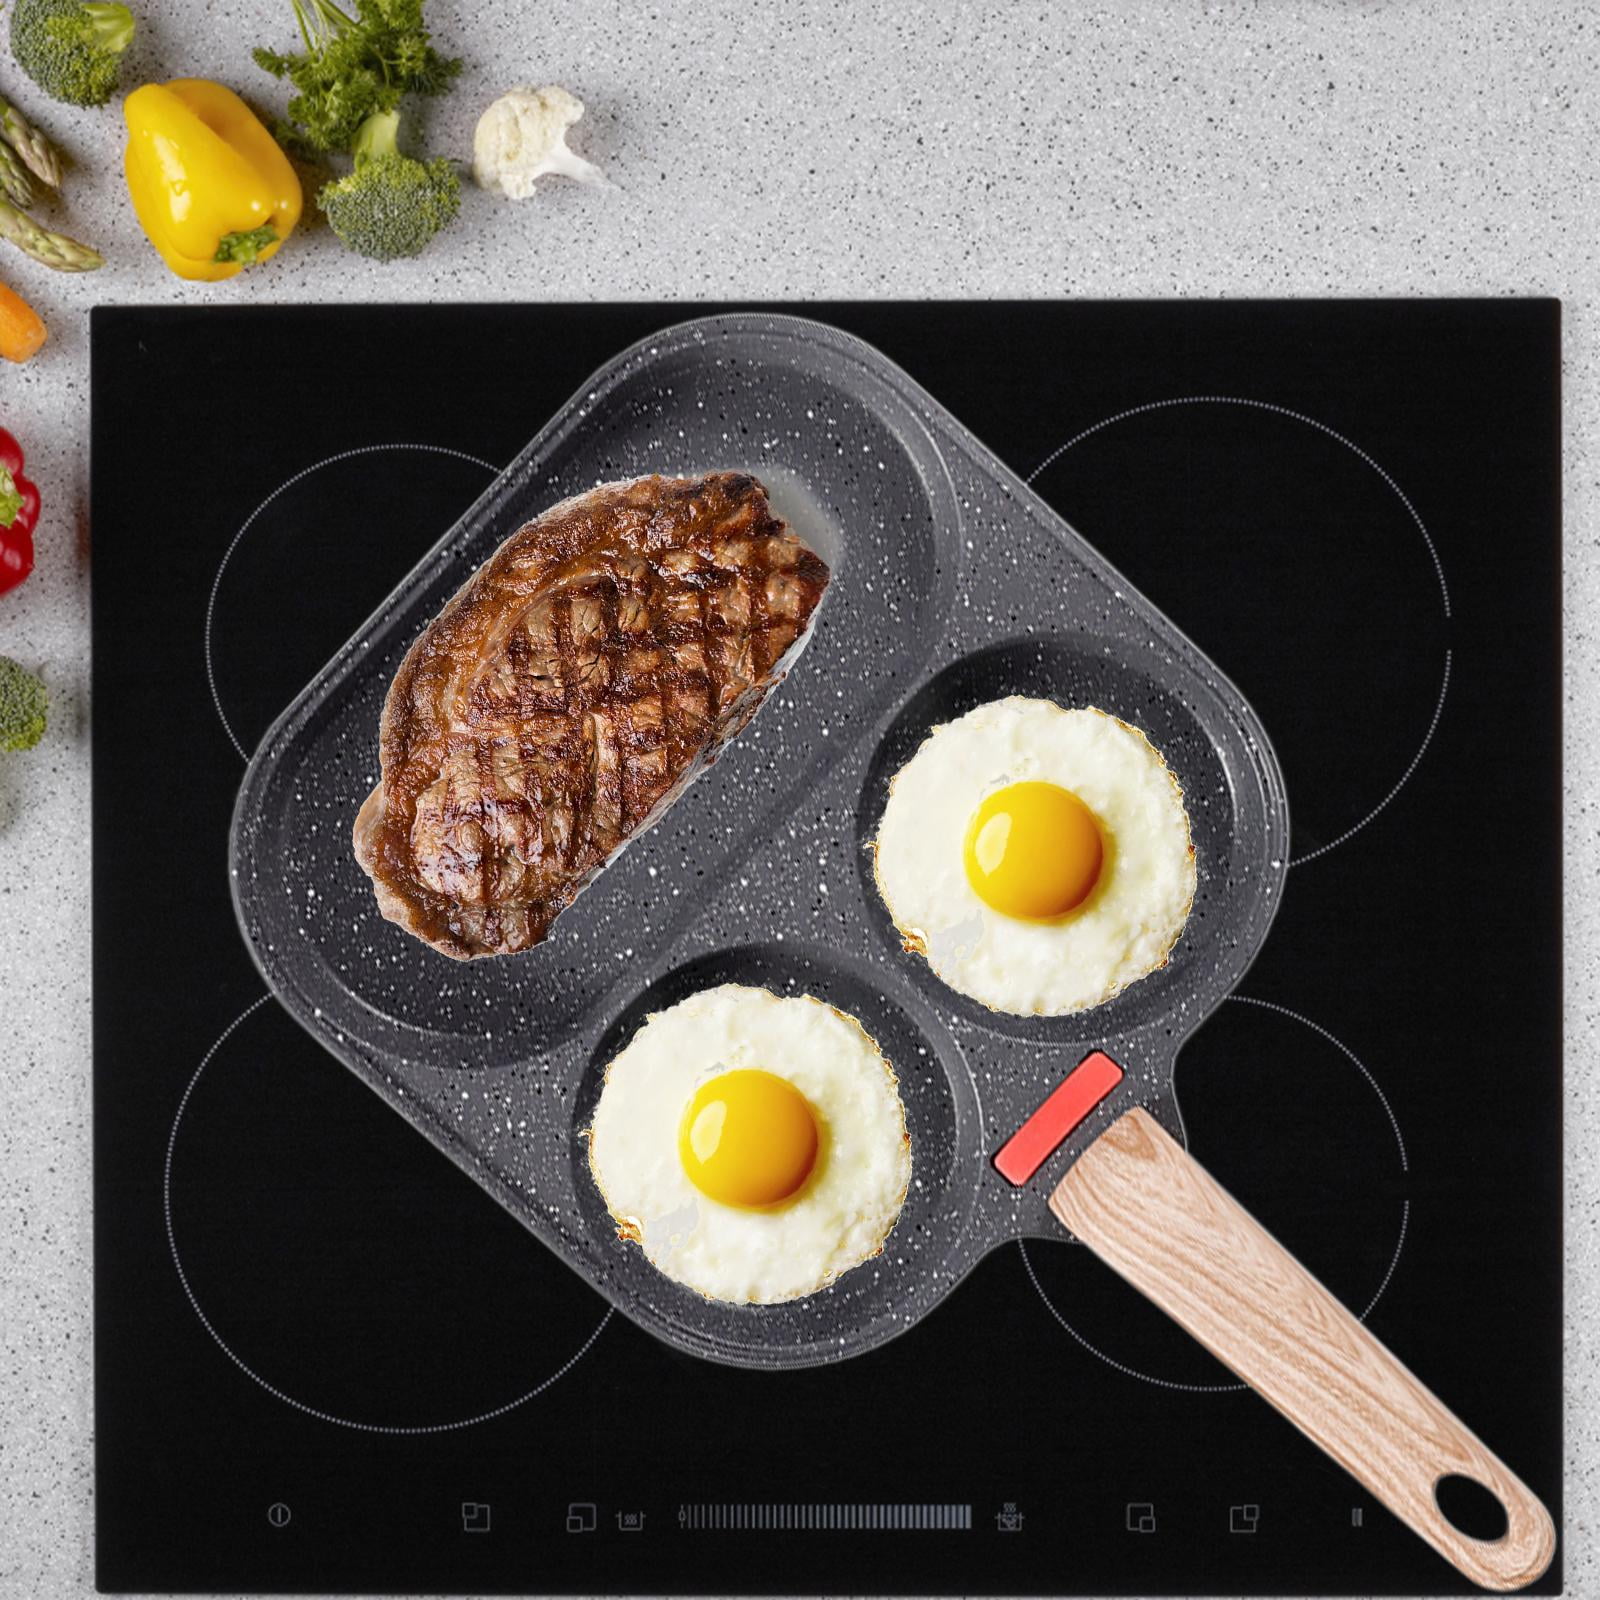 Egg Burger Maker Pan, Healthy Non Stick Oil Divided Grill Frying Pan With  Handle For Pancakes For Home Cooking 